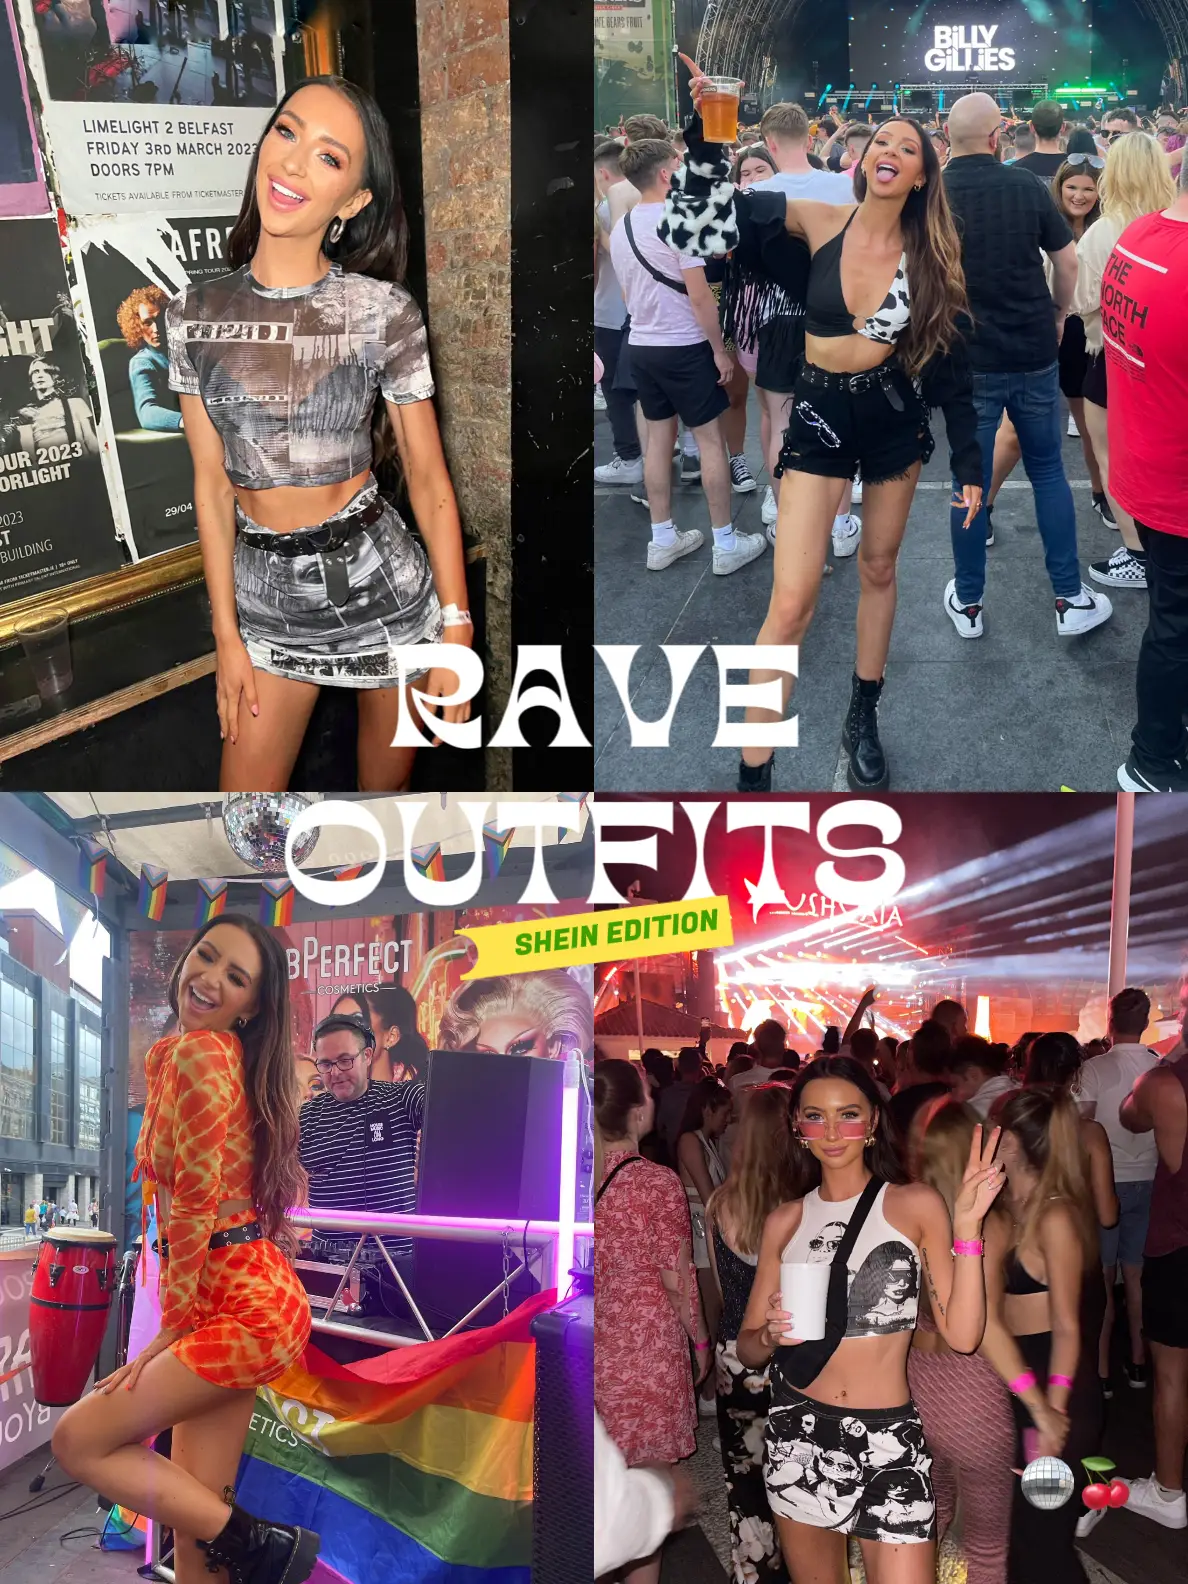 200 Best Winter Rave Outfits ideas  rave outfits, winter rave outfits,  winter rave